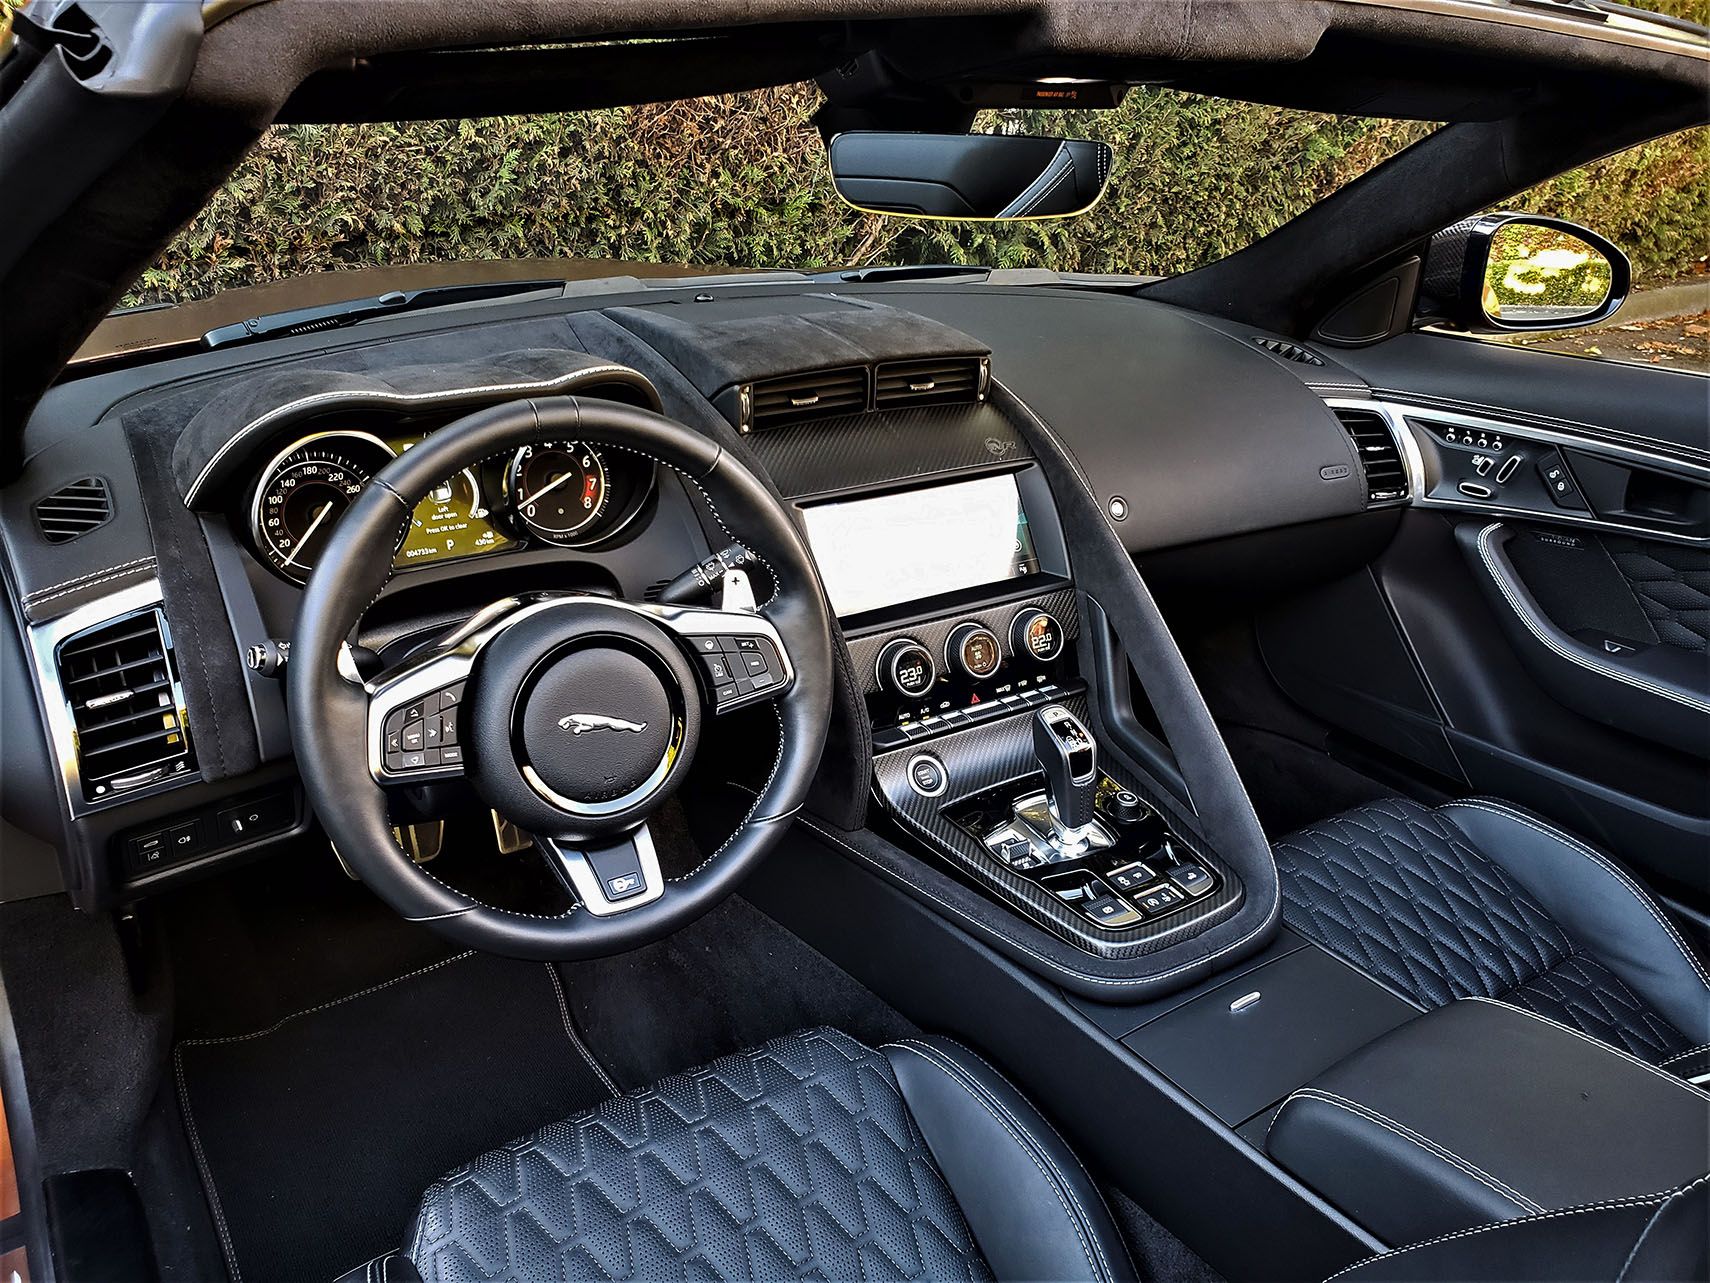 The F-Type SVR's cabin is beautiful made.